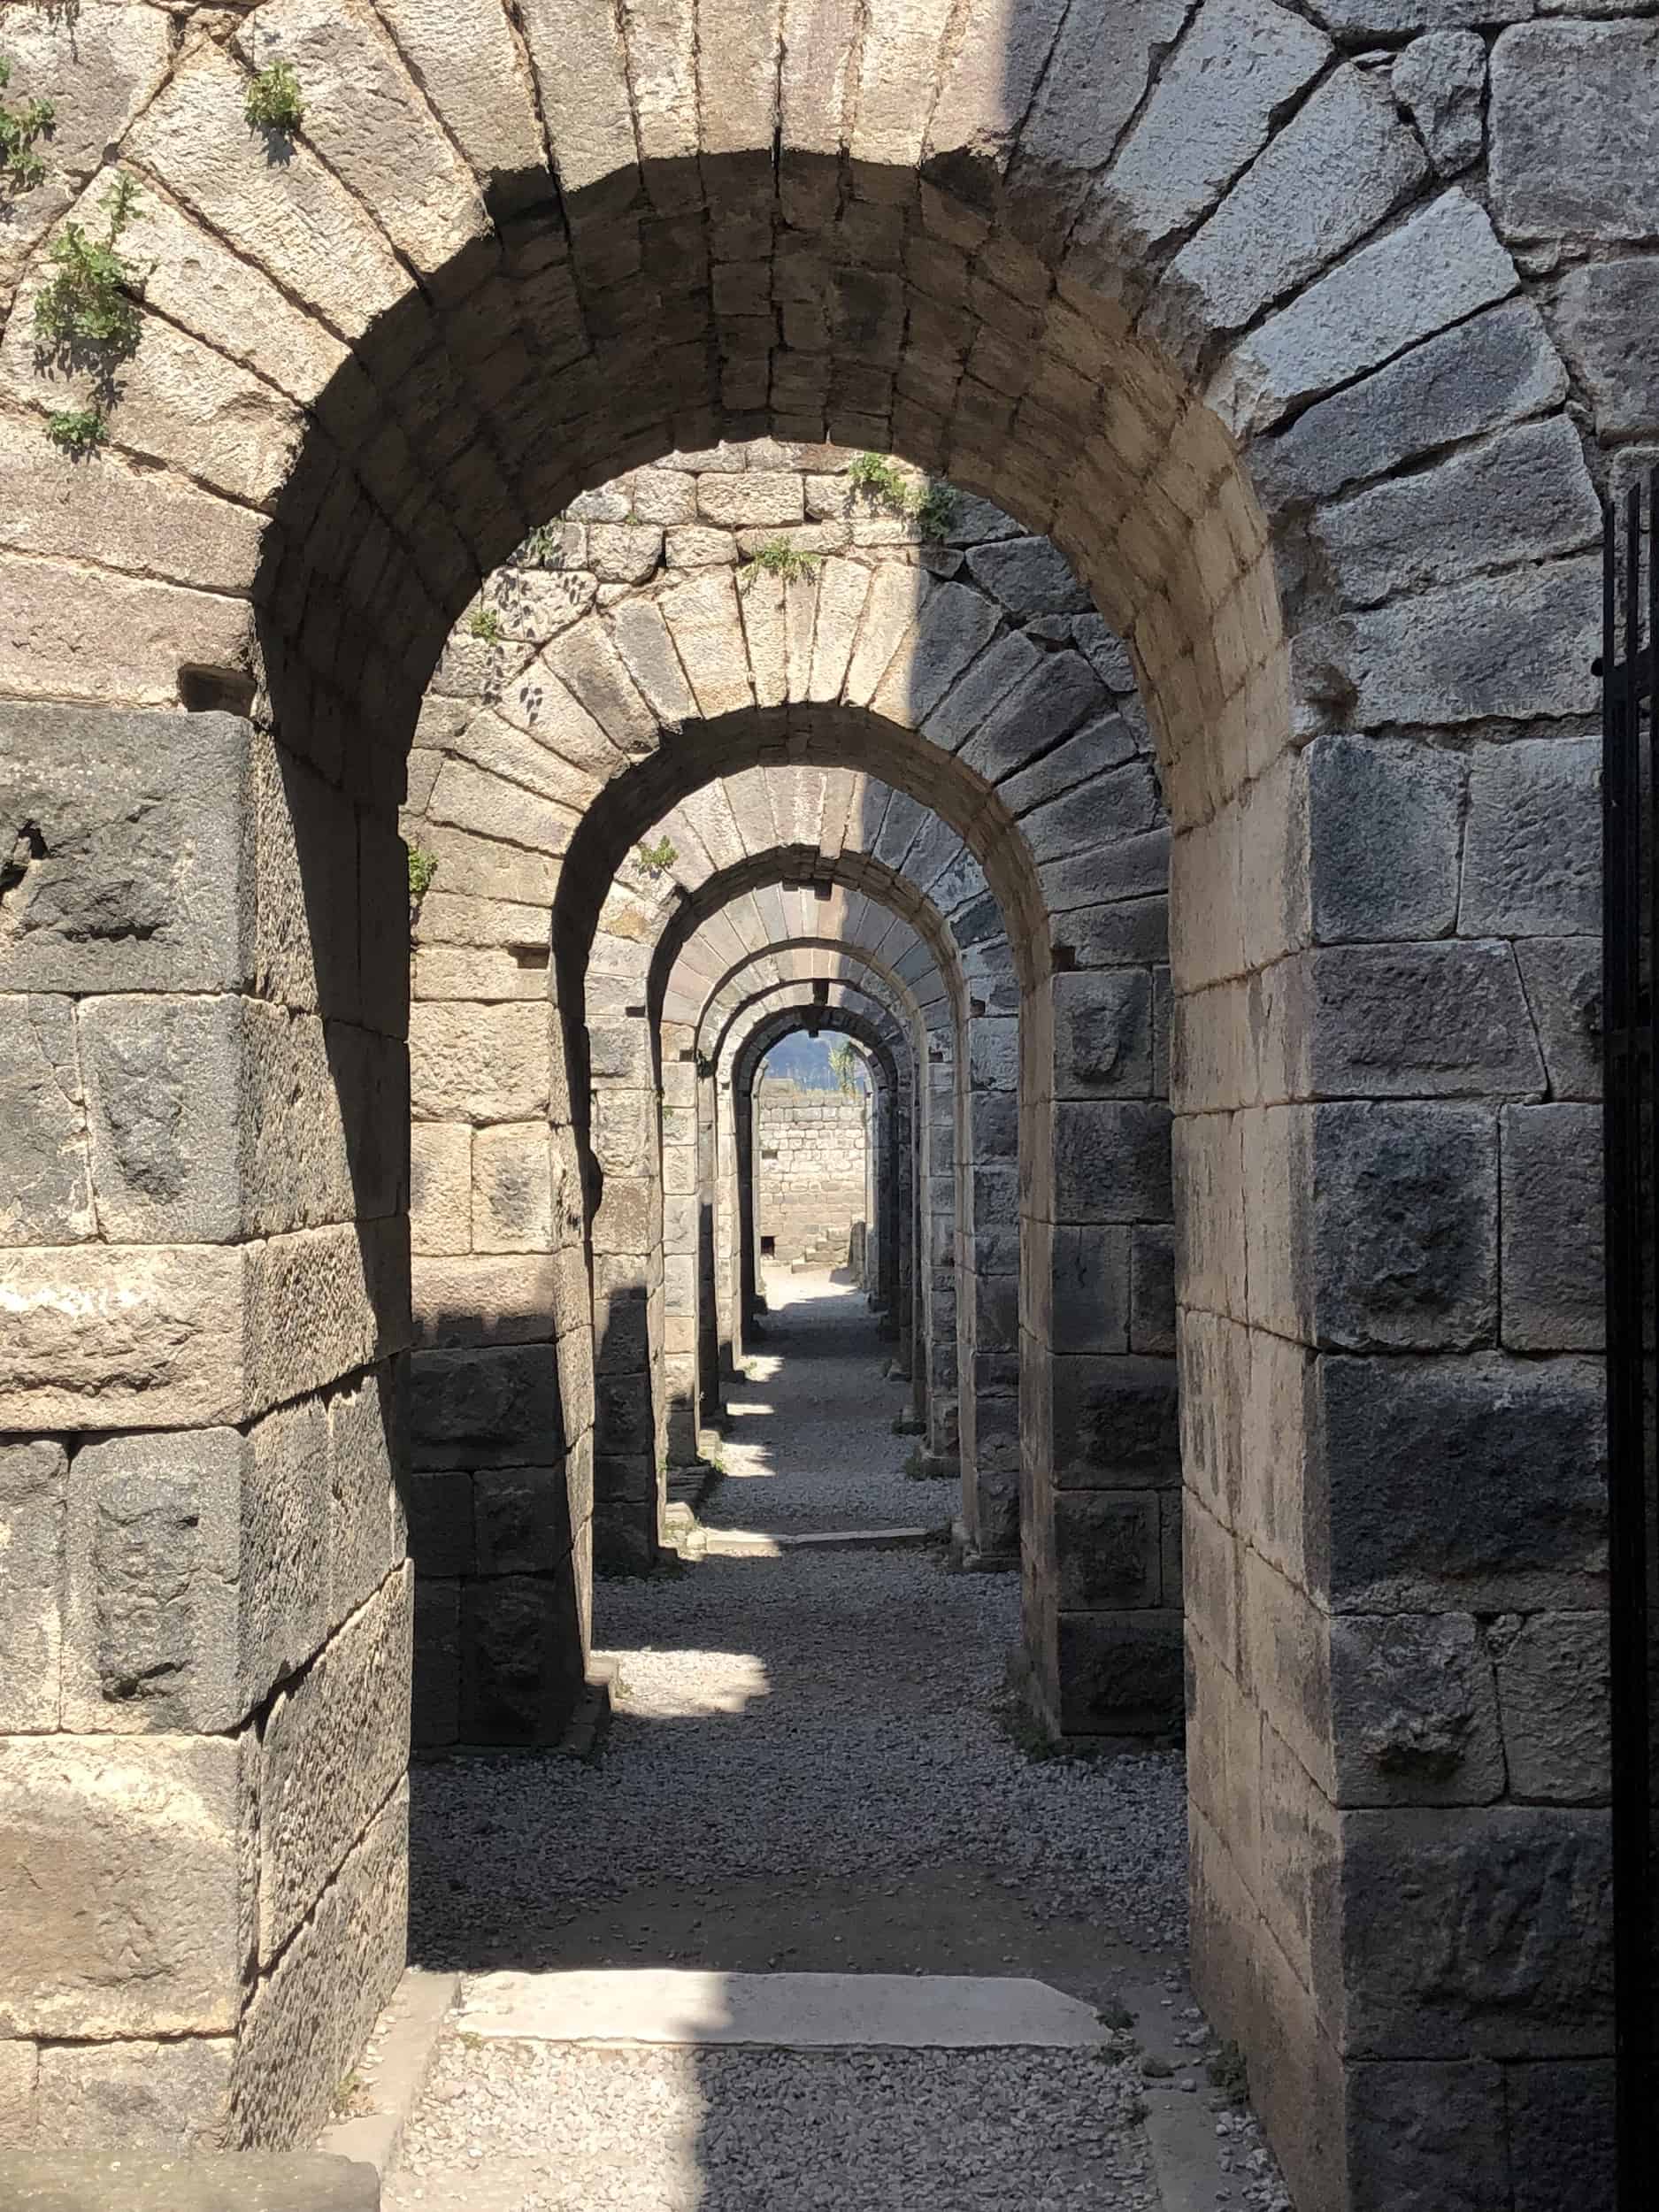 Vaulted substructure of the Temple of Trajan at the Pergamon Acropolis in Bergama, Turkey